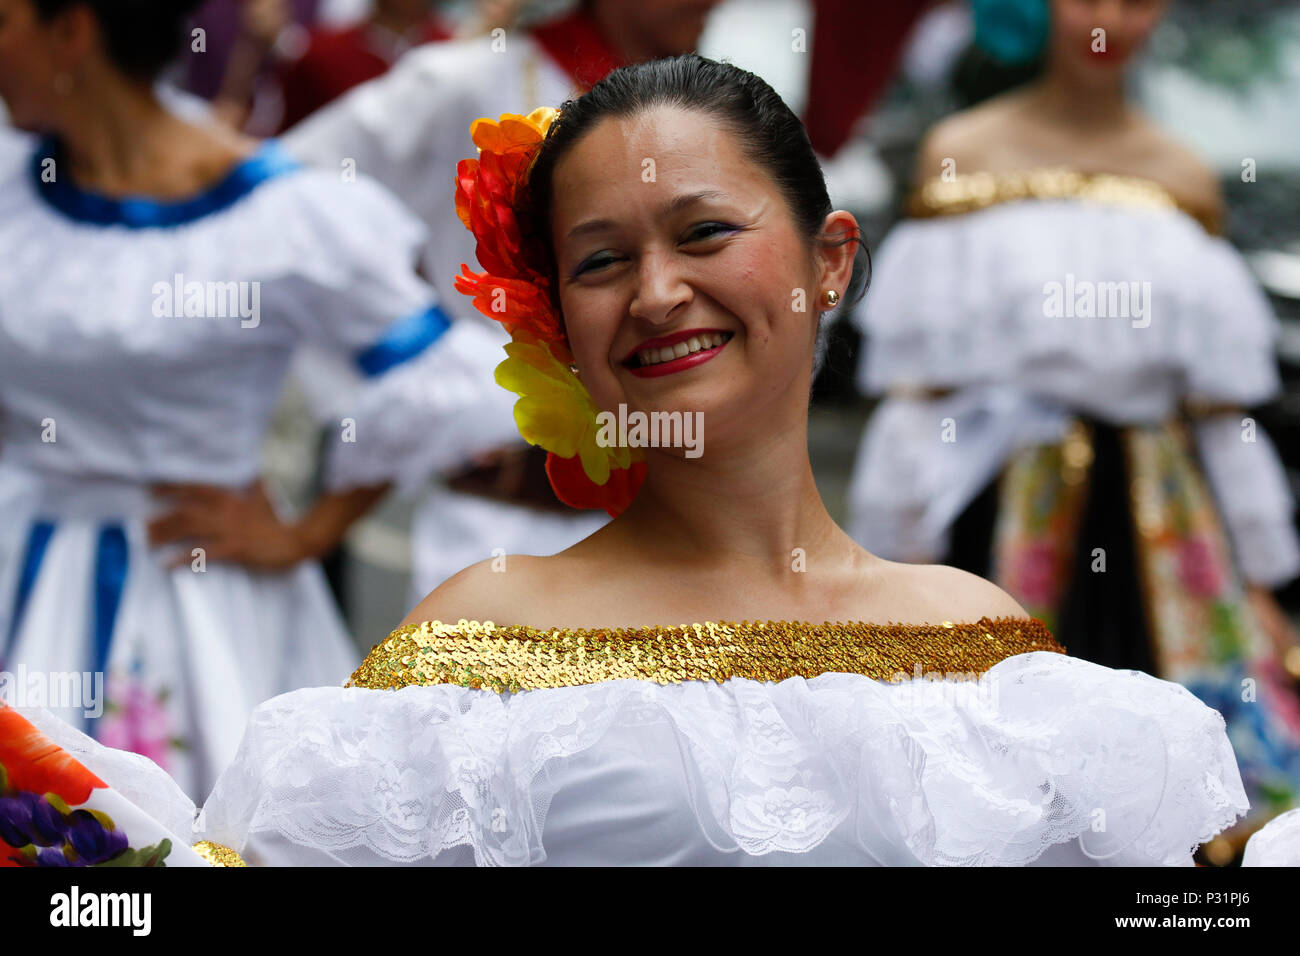 frankfurt germany 16th june 2018 a columbian woman participates in the parade wearing a traditional dress thousands of people participated and watched the 2018 parade der kulturen parade of cultures organised by the frankfurter jugendring frankfurt youth council the parade with participants from over 40 different groups of expat and cultural organisations showcased the cultural diversity of frankfurt credit michael debetspacific pressalamy live news P31PJ6